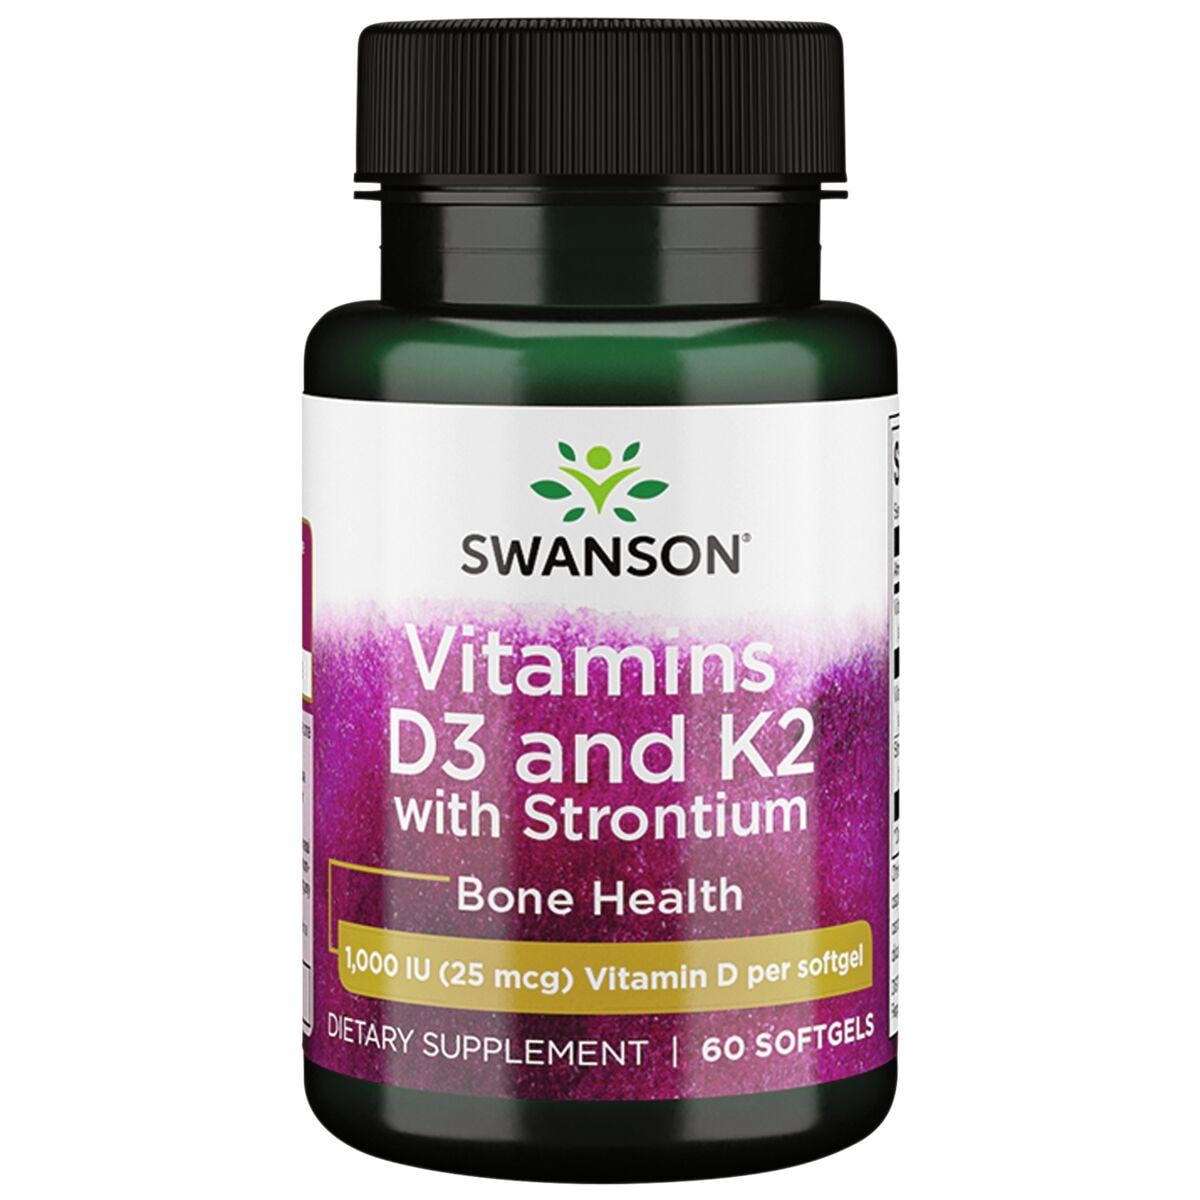 Swanson Ultra Vitamins D3 and K2 with Strontium | 60 Soft Gels